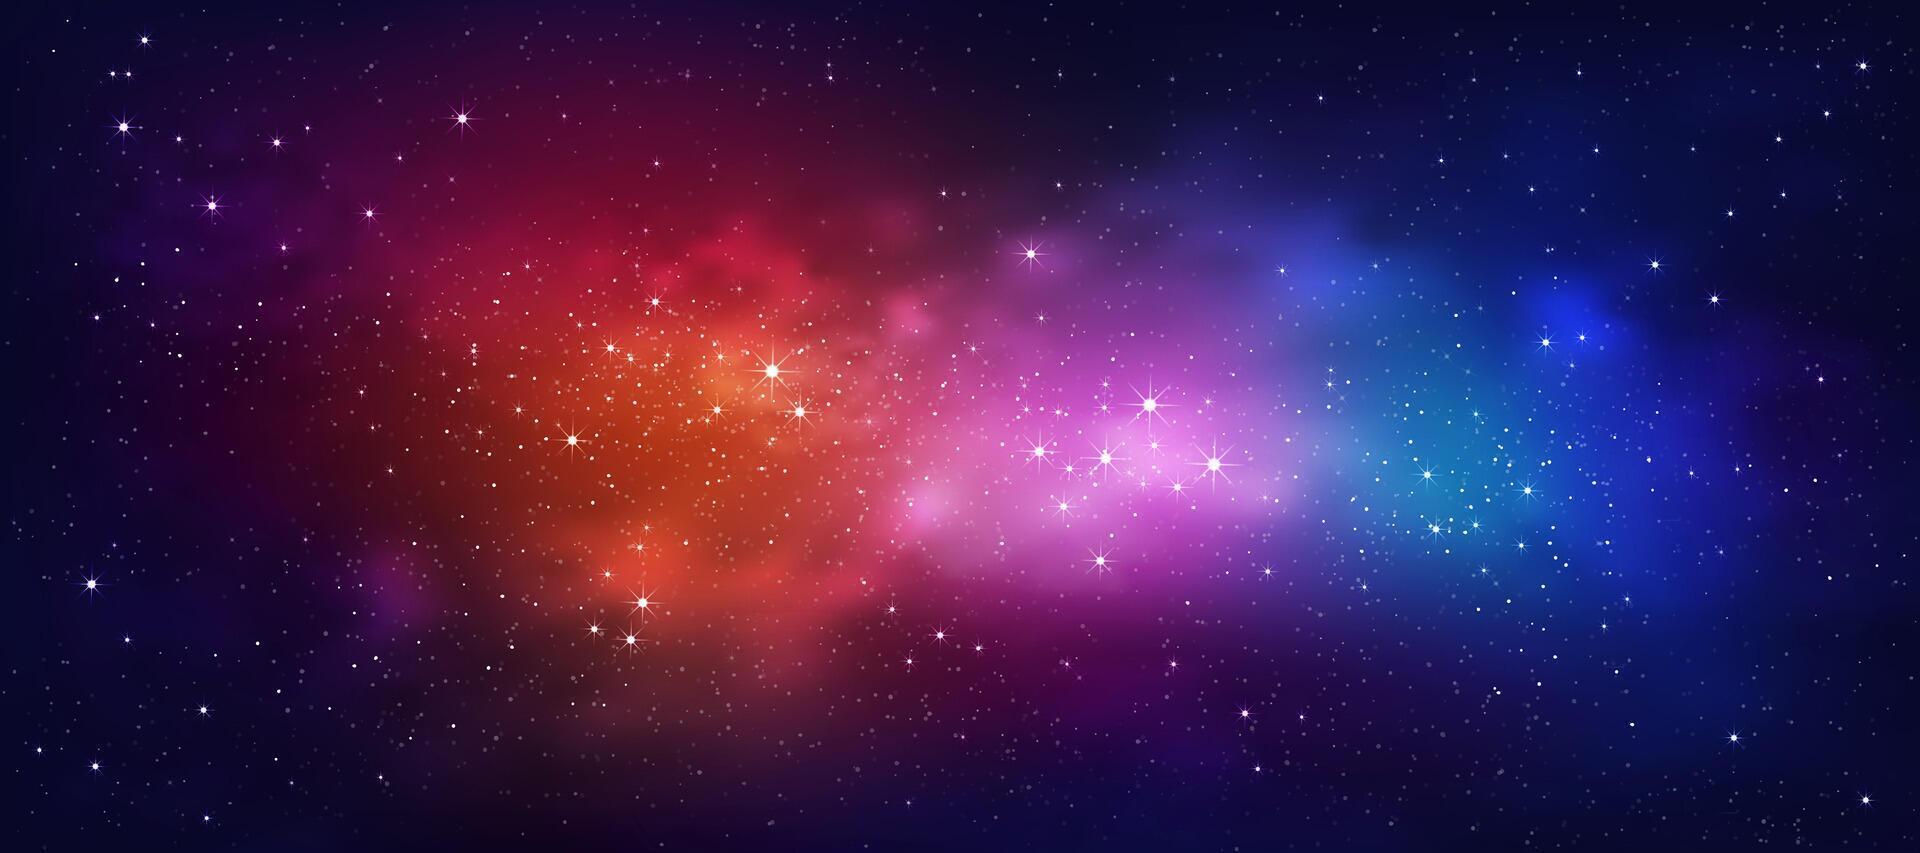 Sky Galaxy,Cloud,Stardust in Deep Universe Nebula and Stars at Night Background, Starry,Purple, Dark Blue Sky,Beautiful Nature Star field with Milky Way,Horizon banner colorful cosmos vector